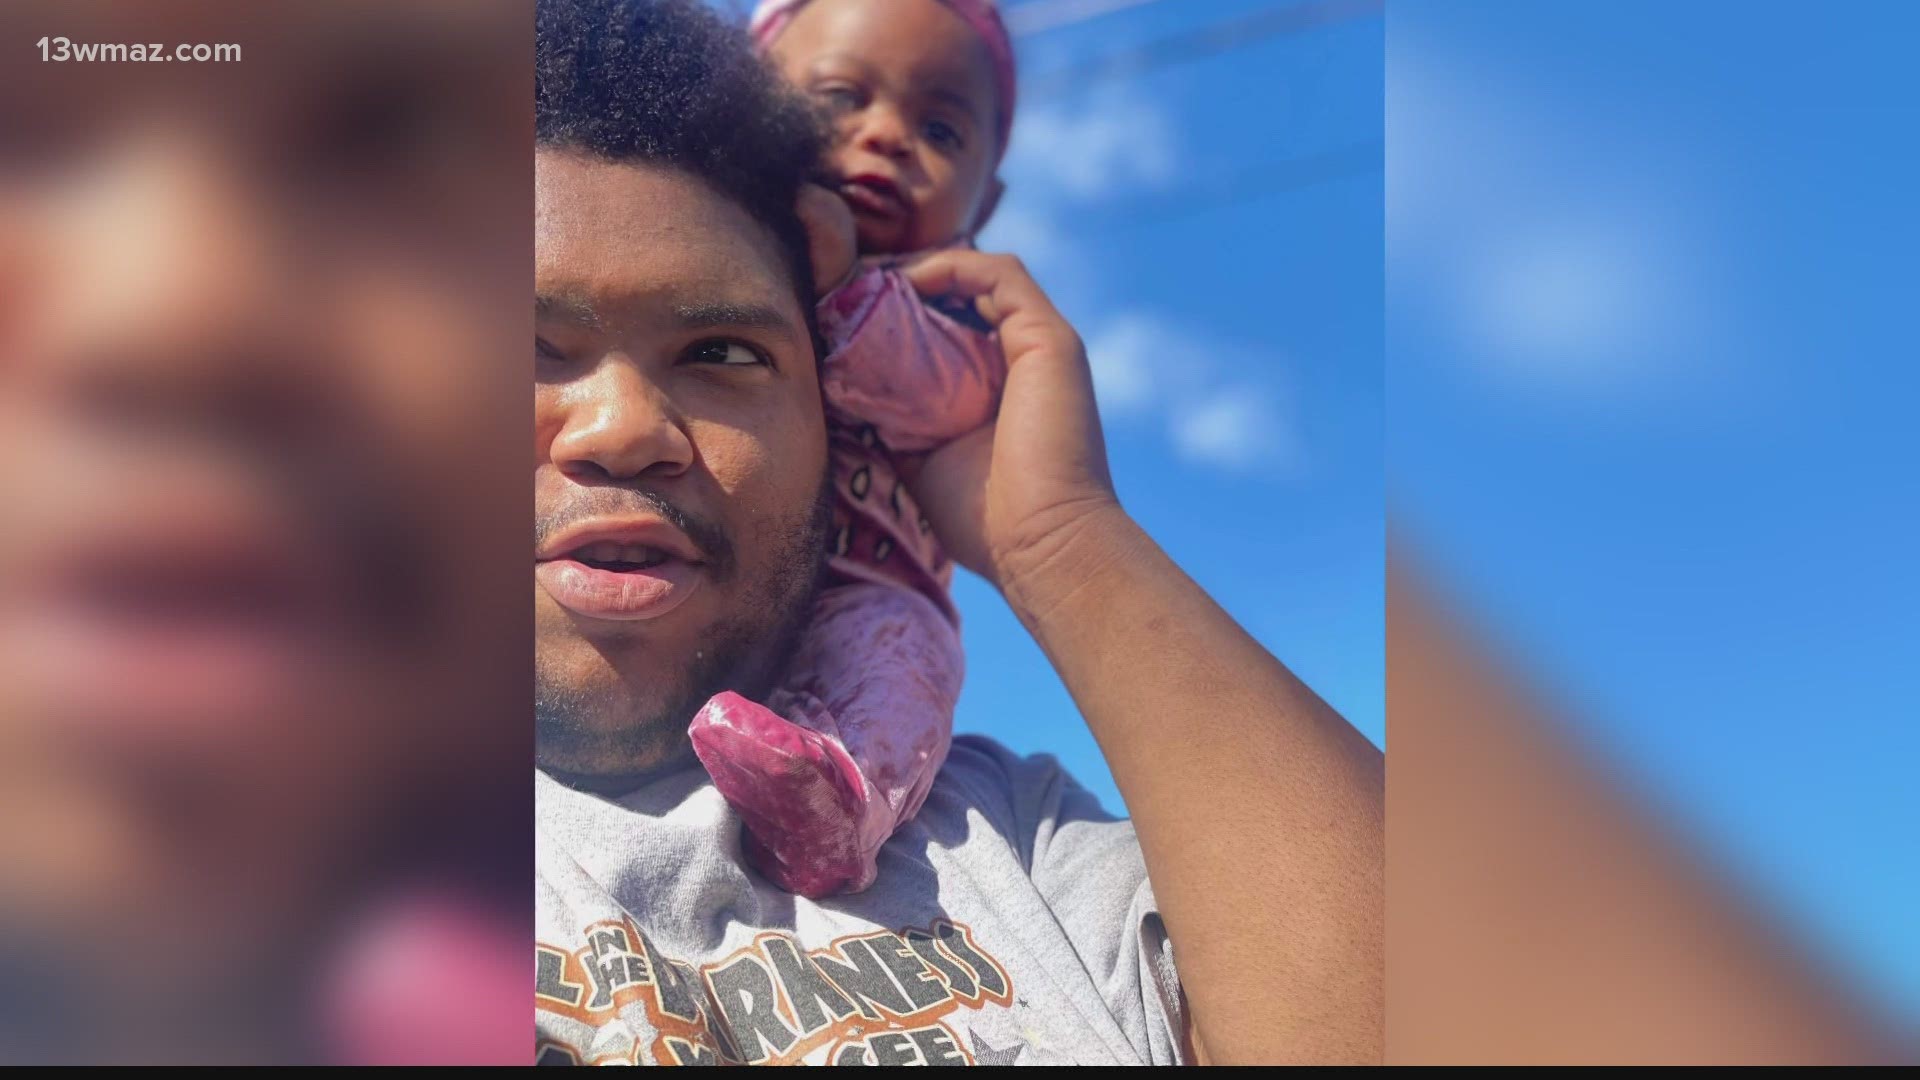 The Bibb County Sheriff's Office is looking for 19-year-old twins Divine and Divinity Taylor in connection to this shooting.